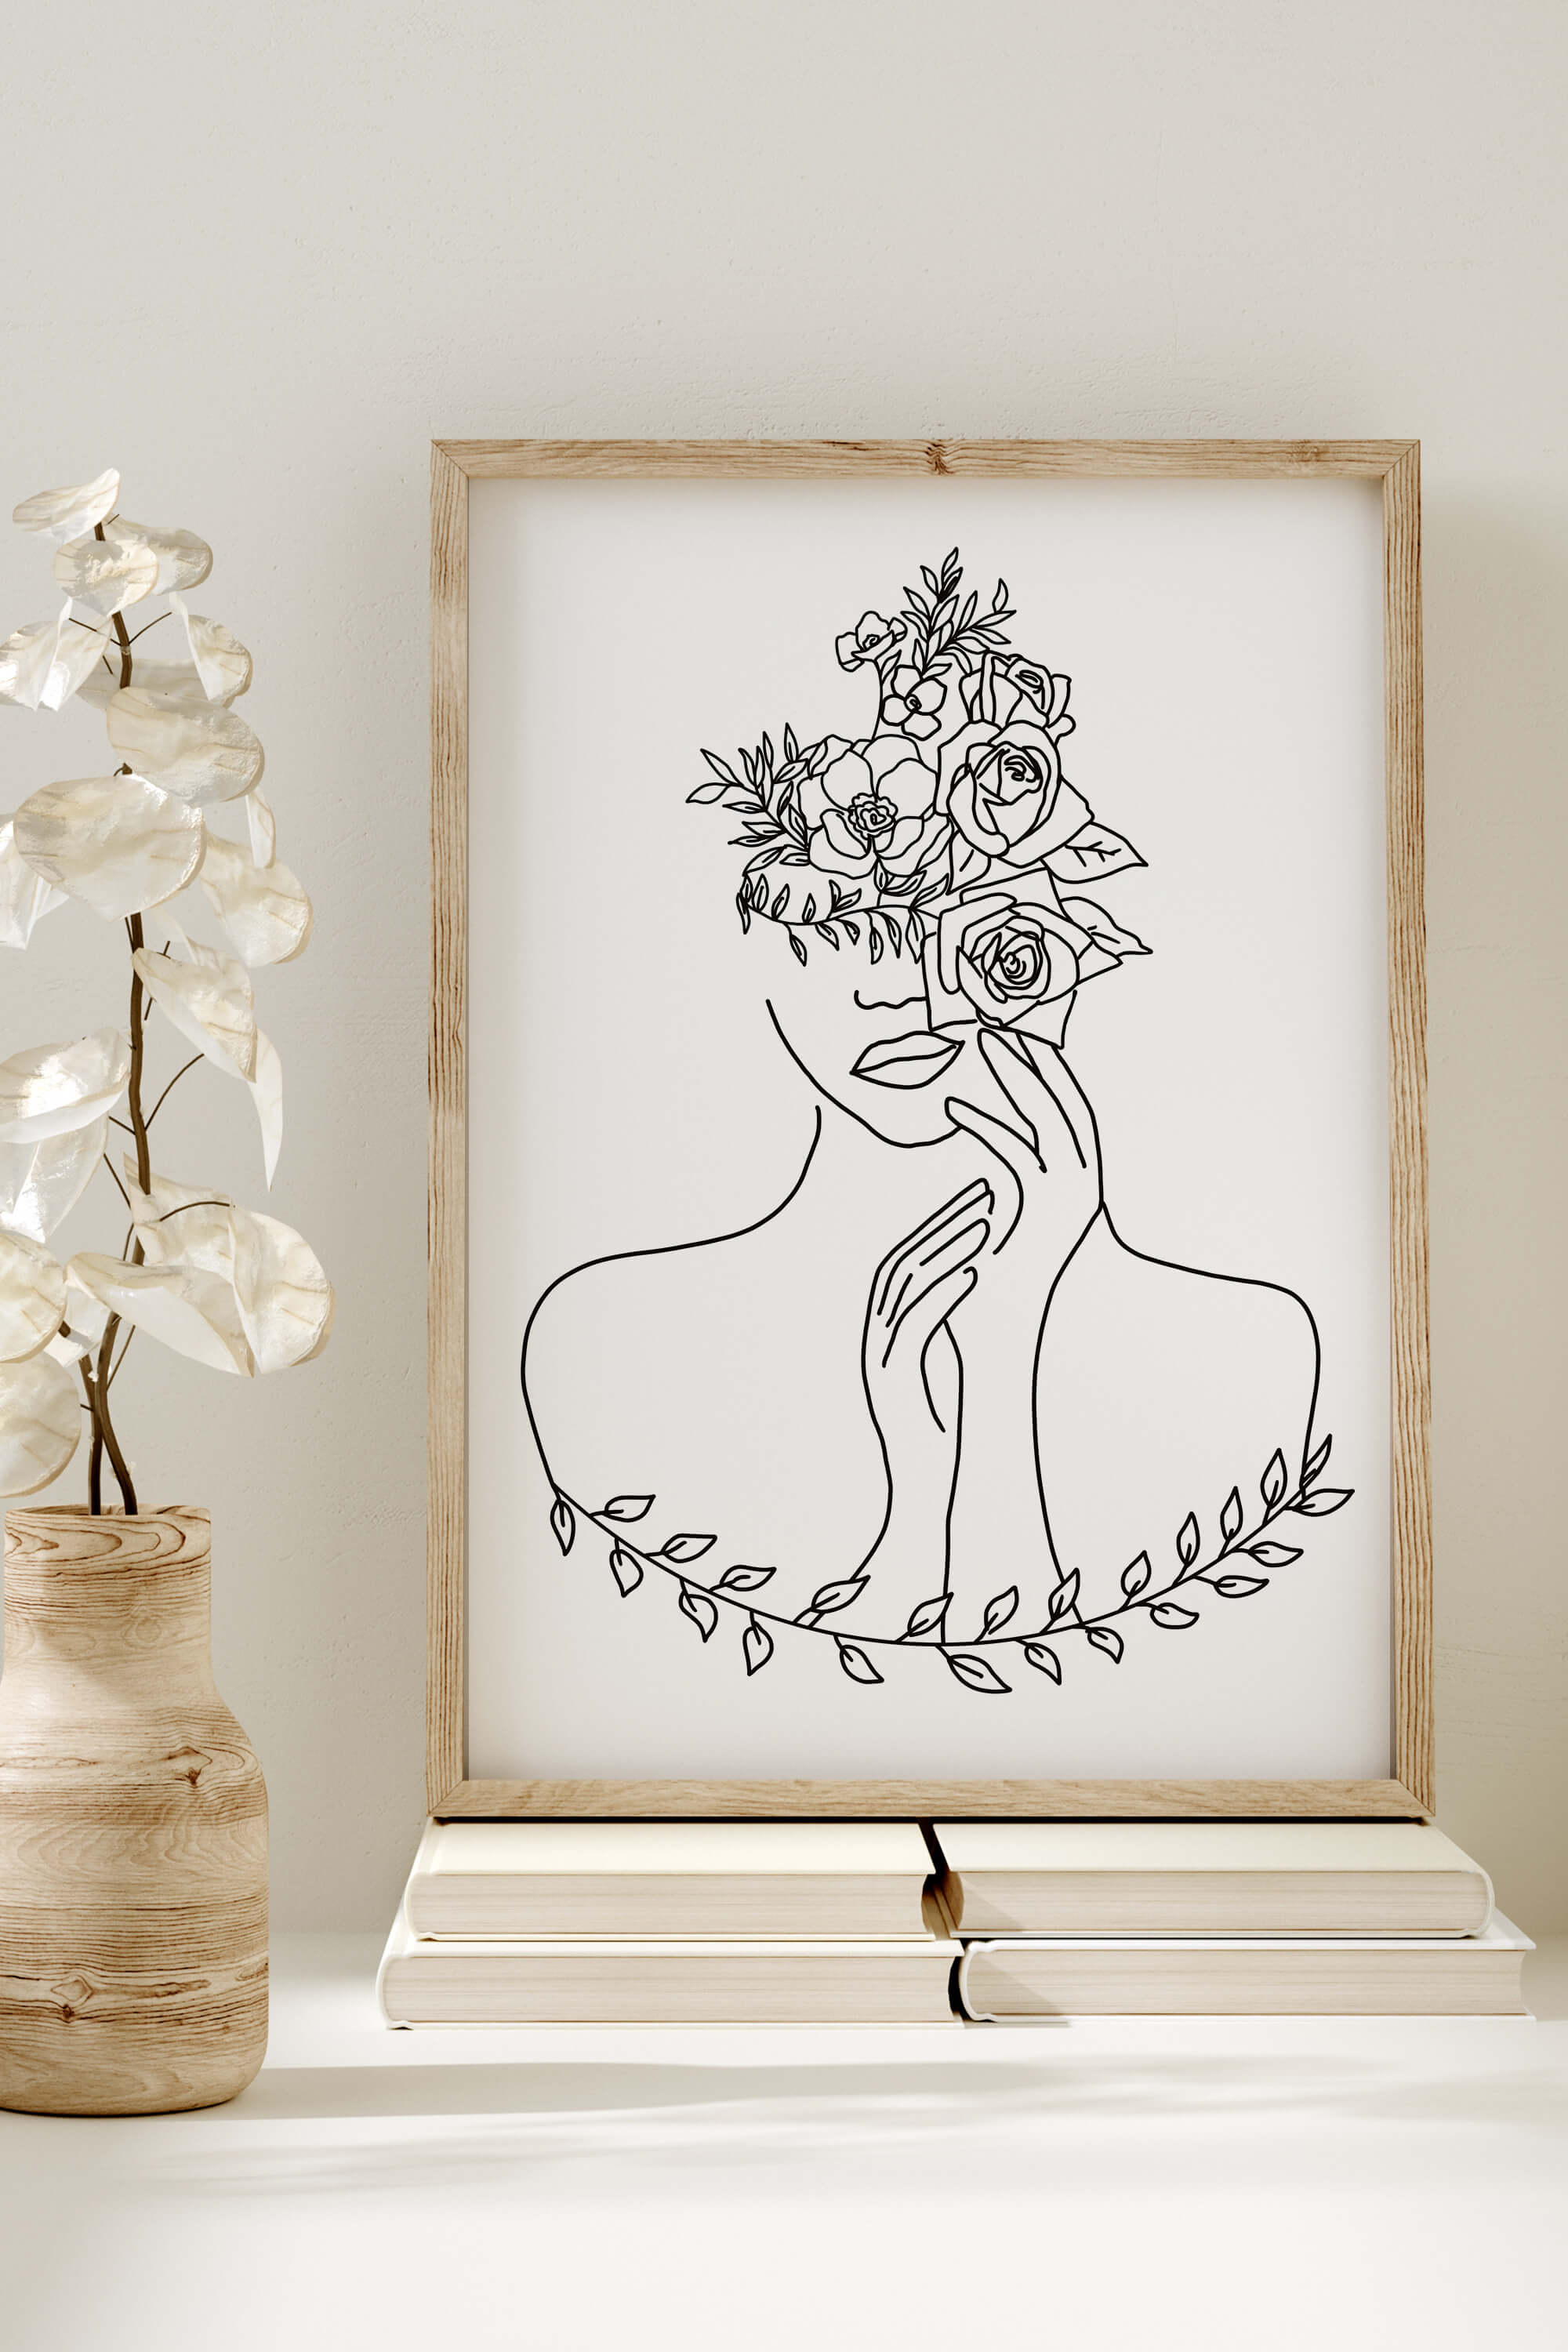  A timeless black and white art print showcasing a captivating portrait through intricate line art. The contrast and simplicity of the design create a visually striking piece that adds an artistic flair to any room.